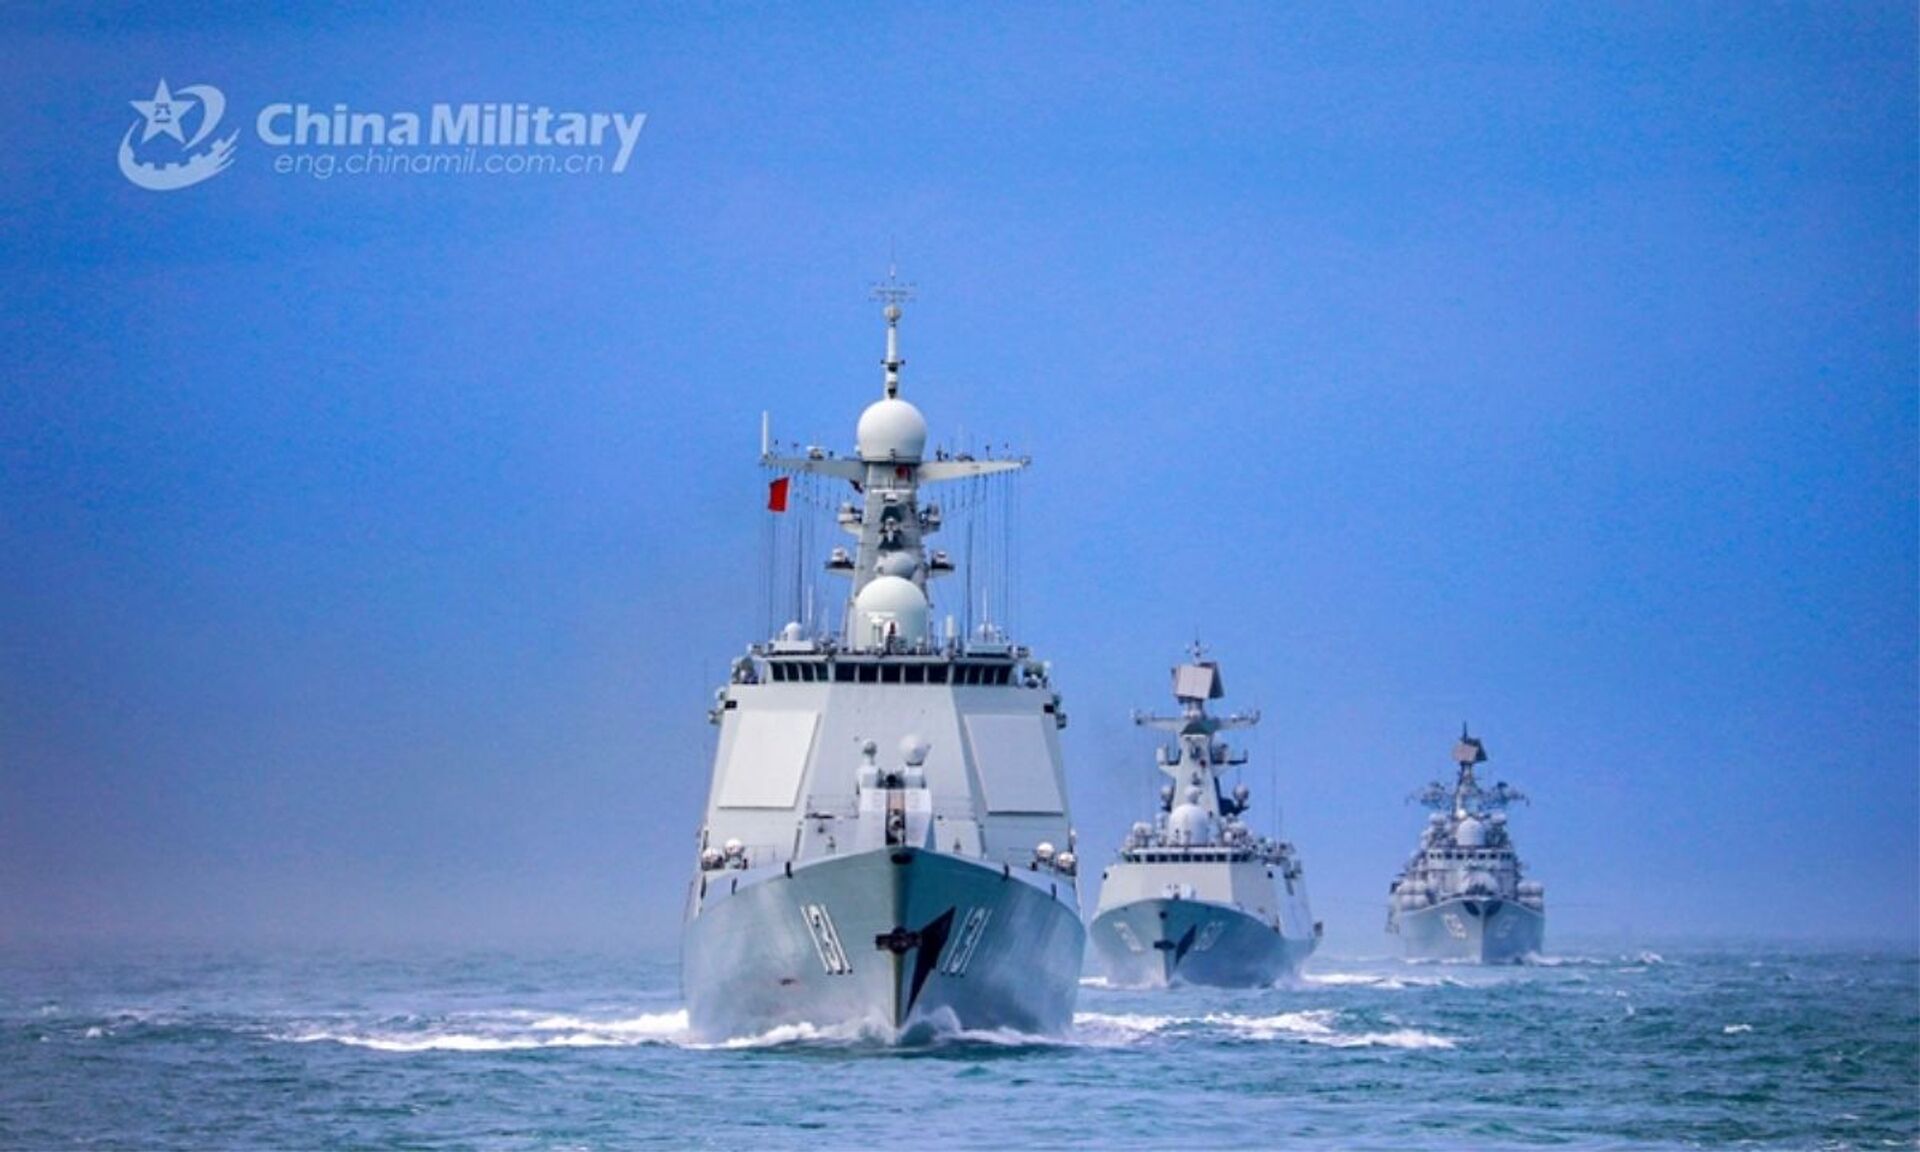 A naval fleet comprised of the guided-missile destroyers Ningbo (Hull 139) and Taiyuan (Hull 131), as well as the guided-missile frigate Nantong (Hull 601), steams in astern formation in waters of the East China Sea during a maritime training drill in late January, 2021 - Sputnik International, 1920, 07.09.2021